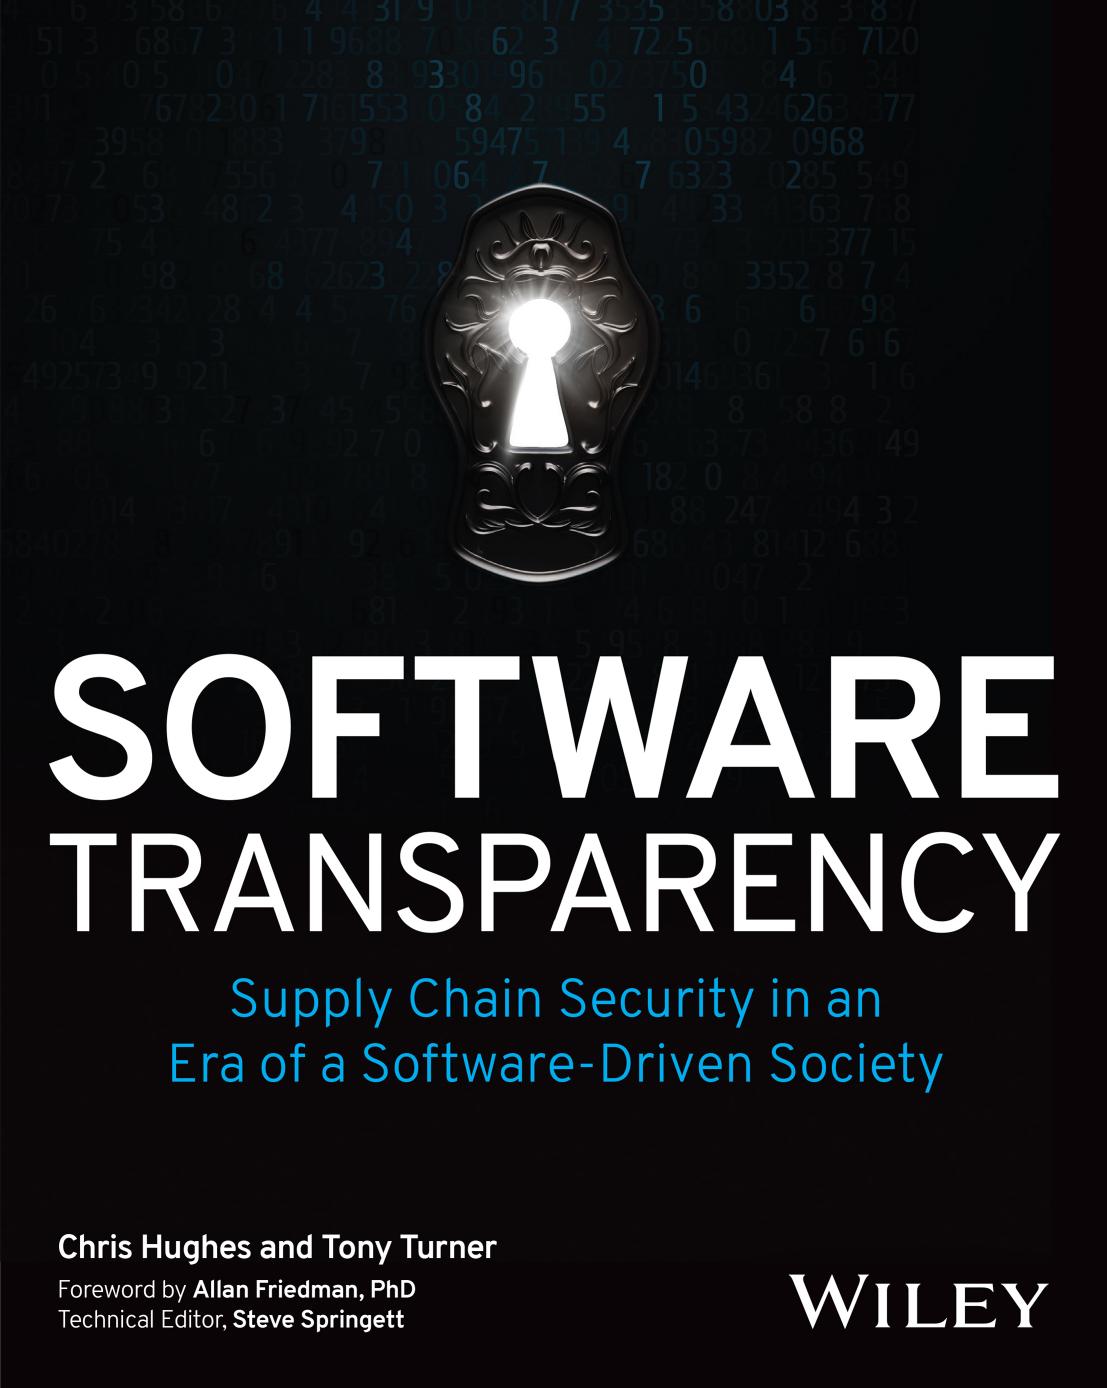 Software Transparency by Chris Hughes and Tony Turner